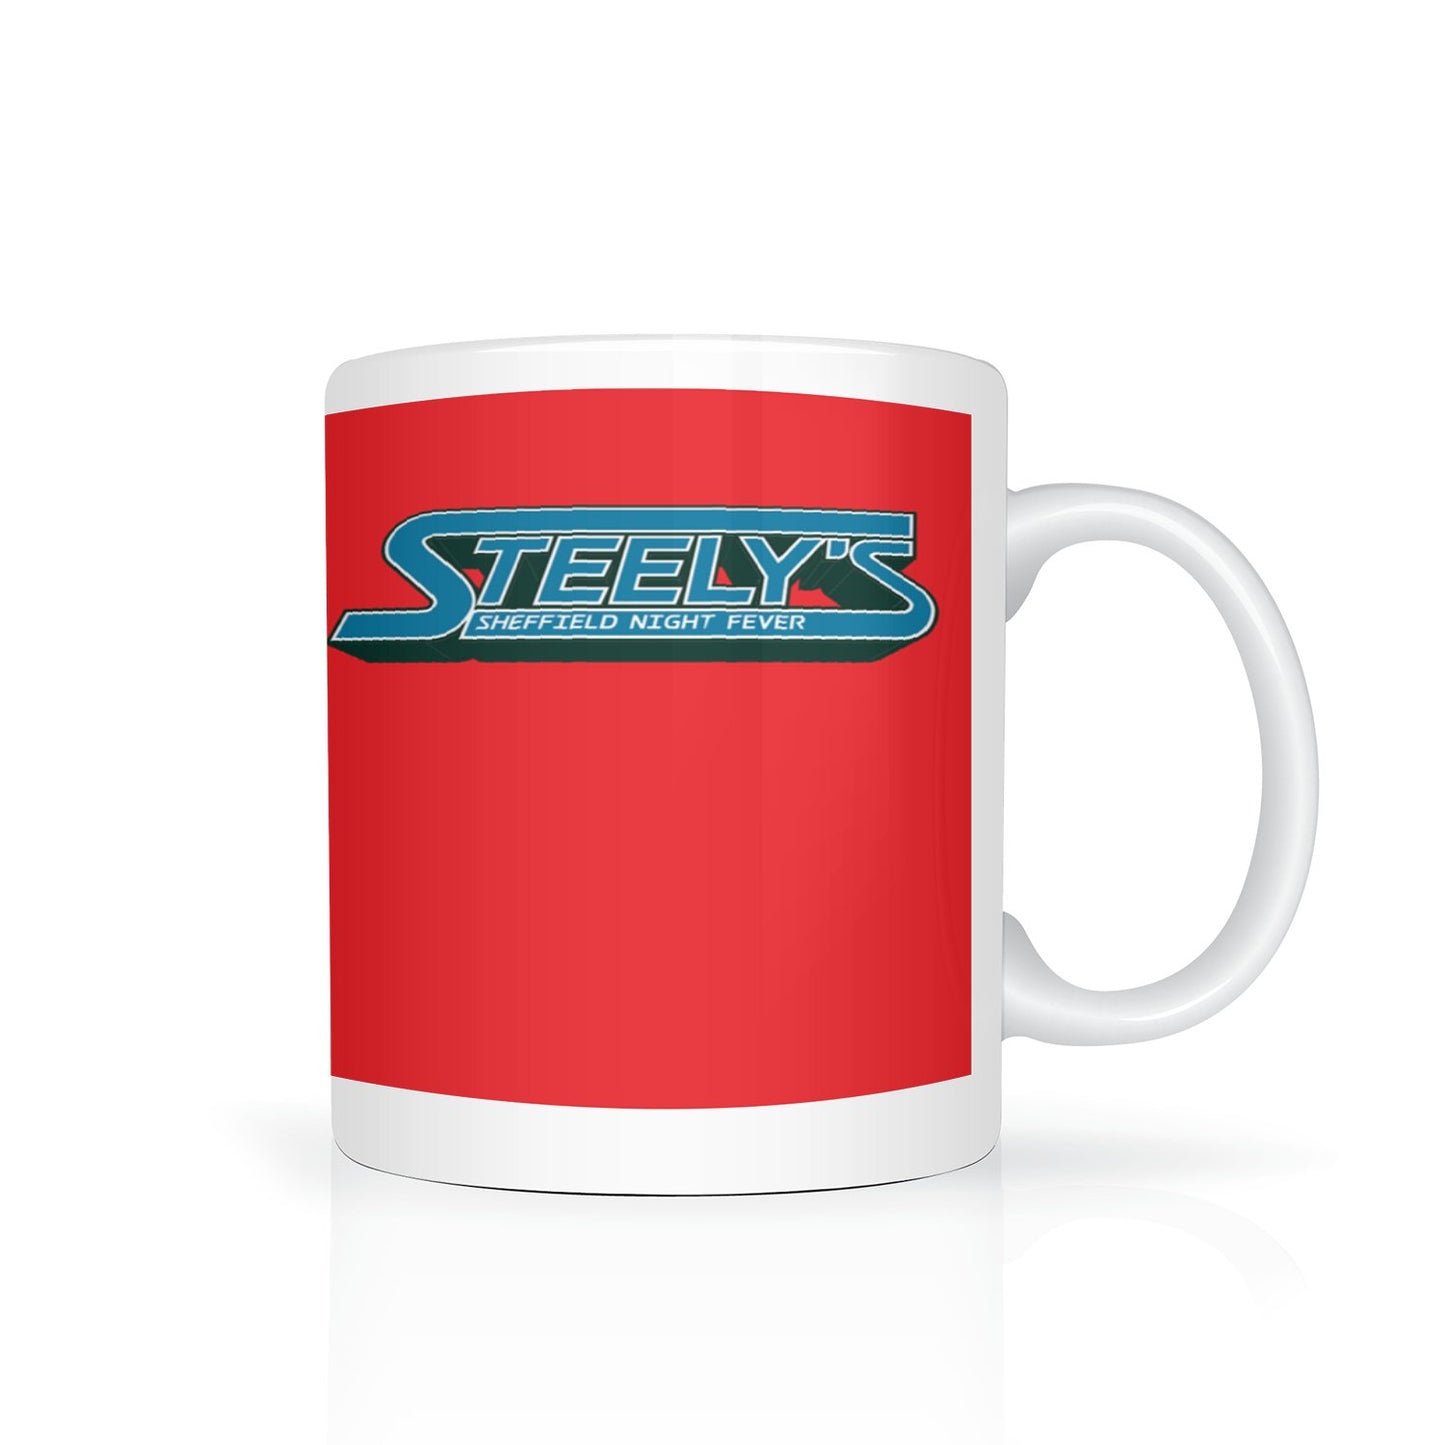 Steely's mug - Dirty Stop Outs